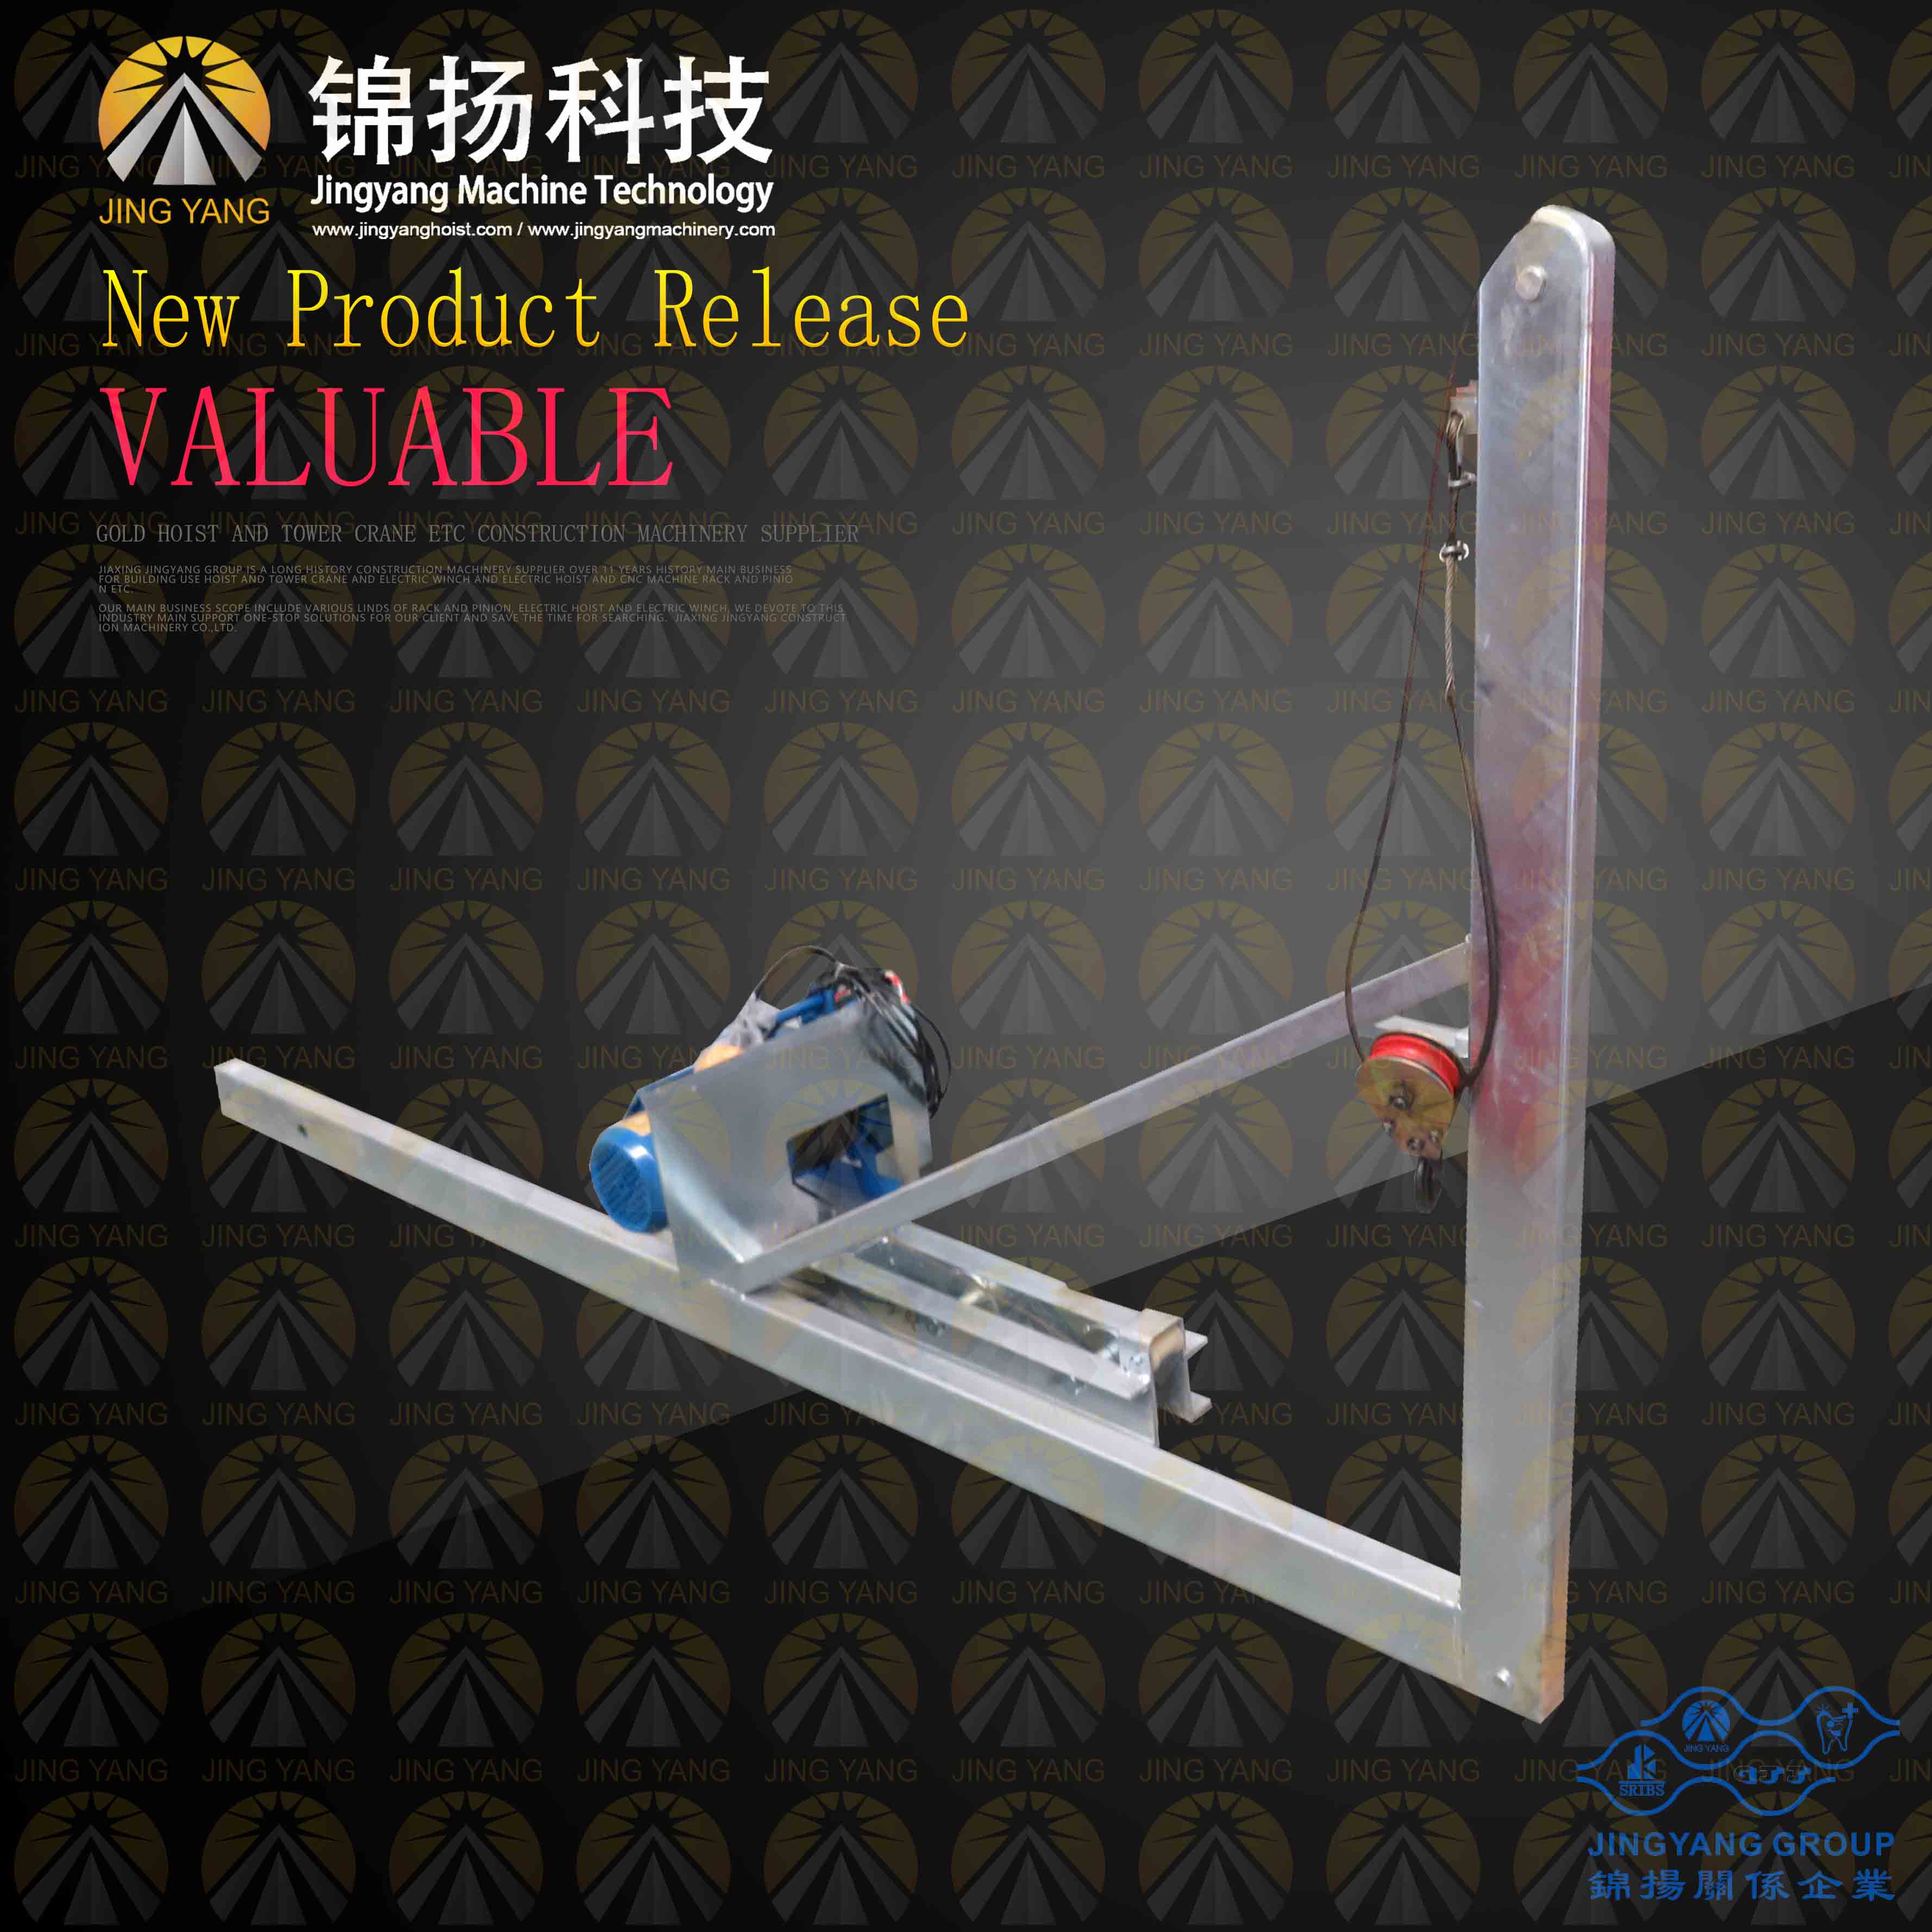 OEM Factory for Automatic Hot Melt Machine -
 GJJ-material-hoist-mast-section-electric-automatic-lifting-device – Jinyang